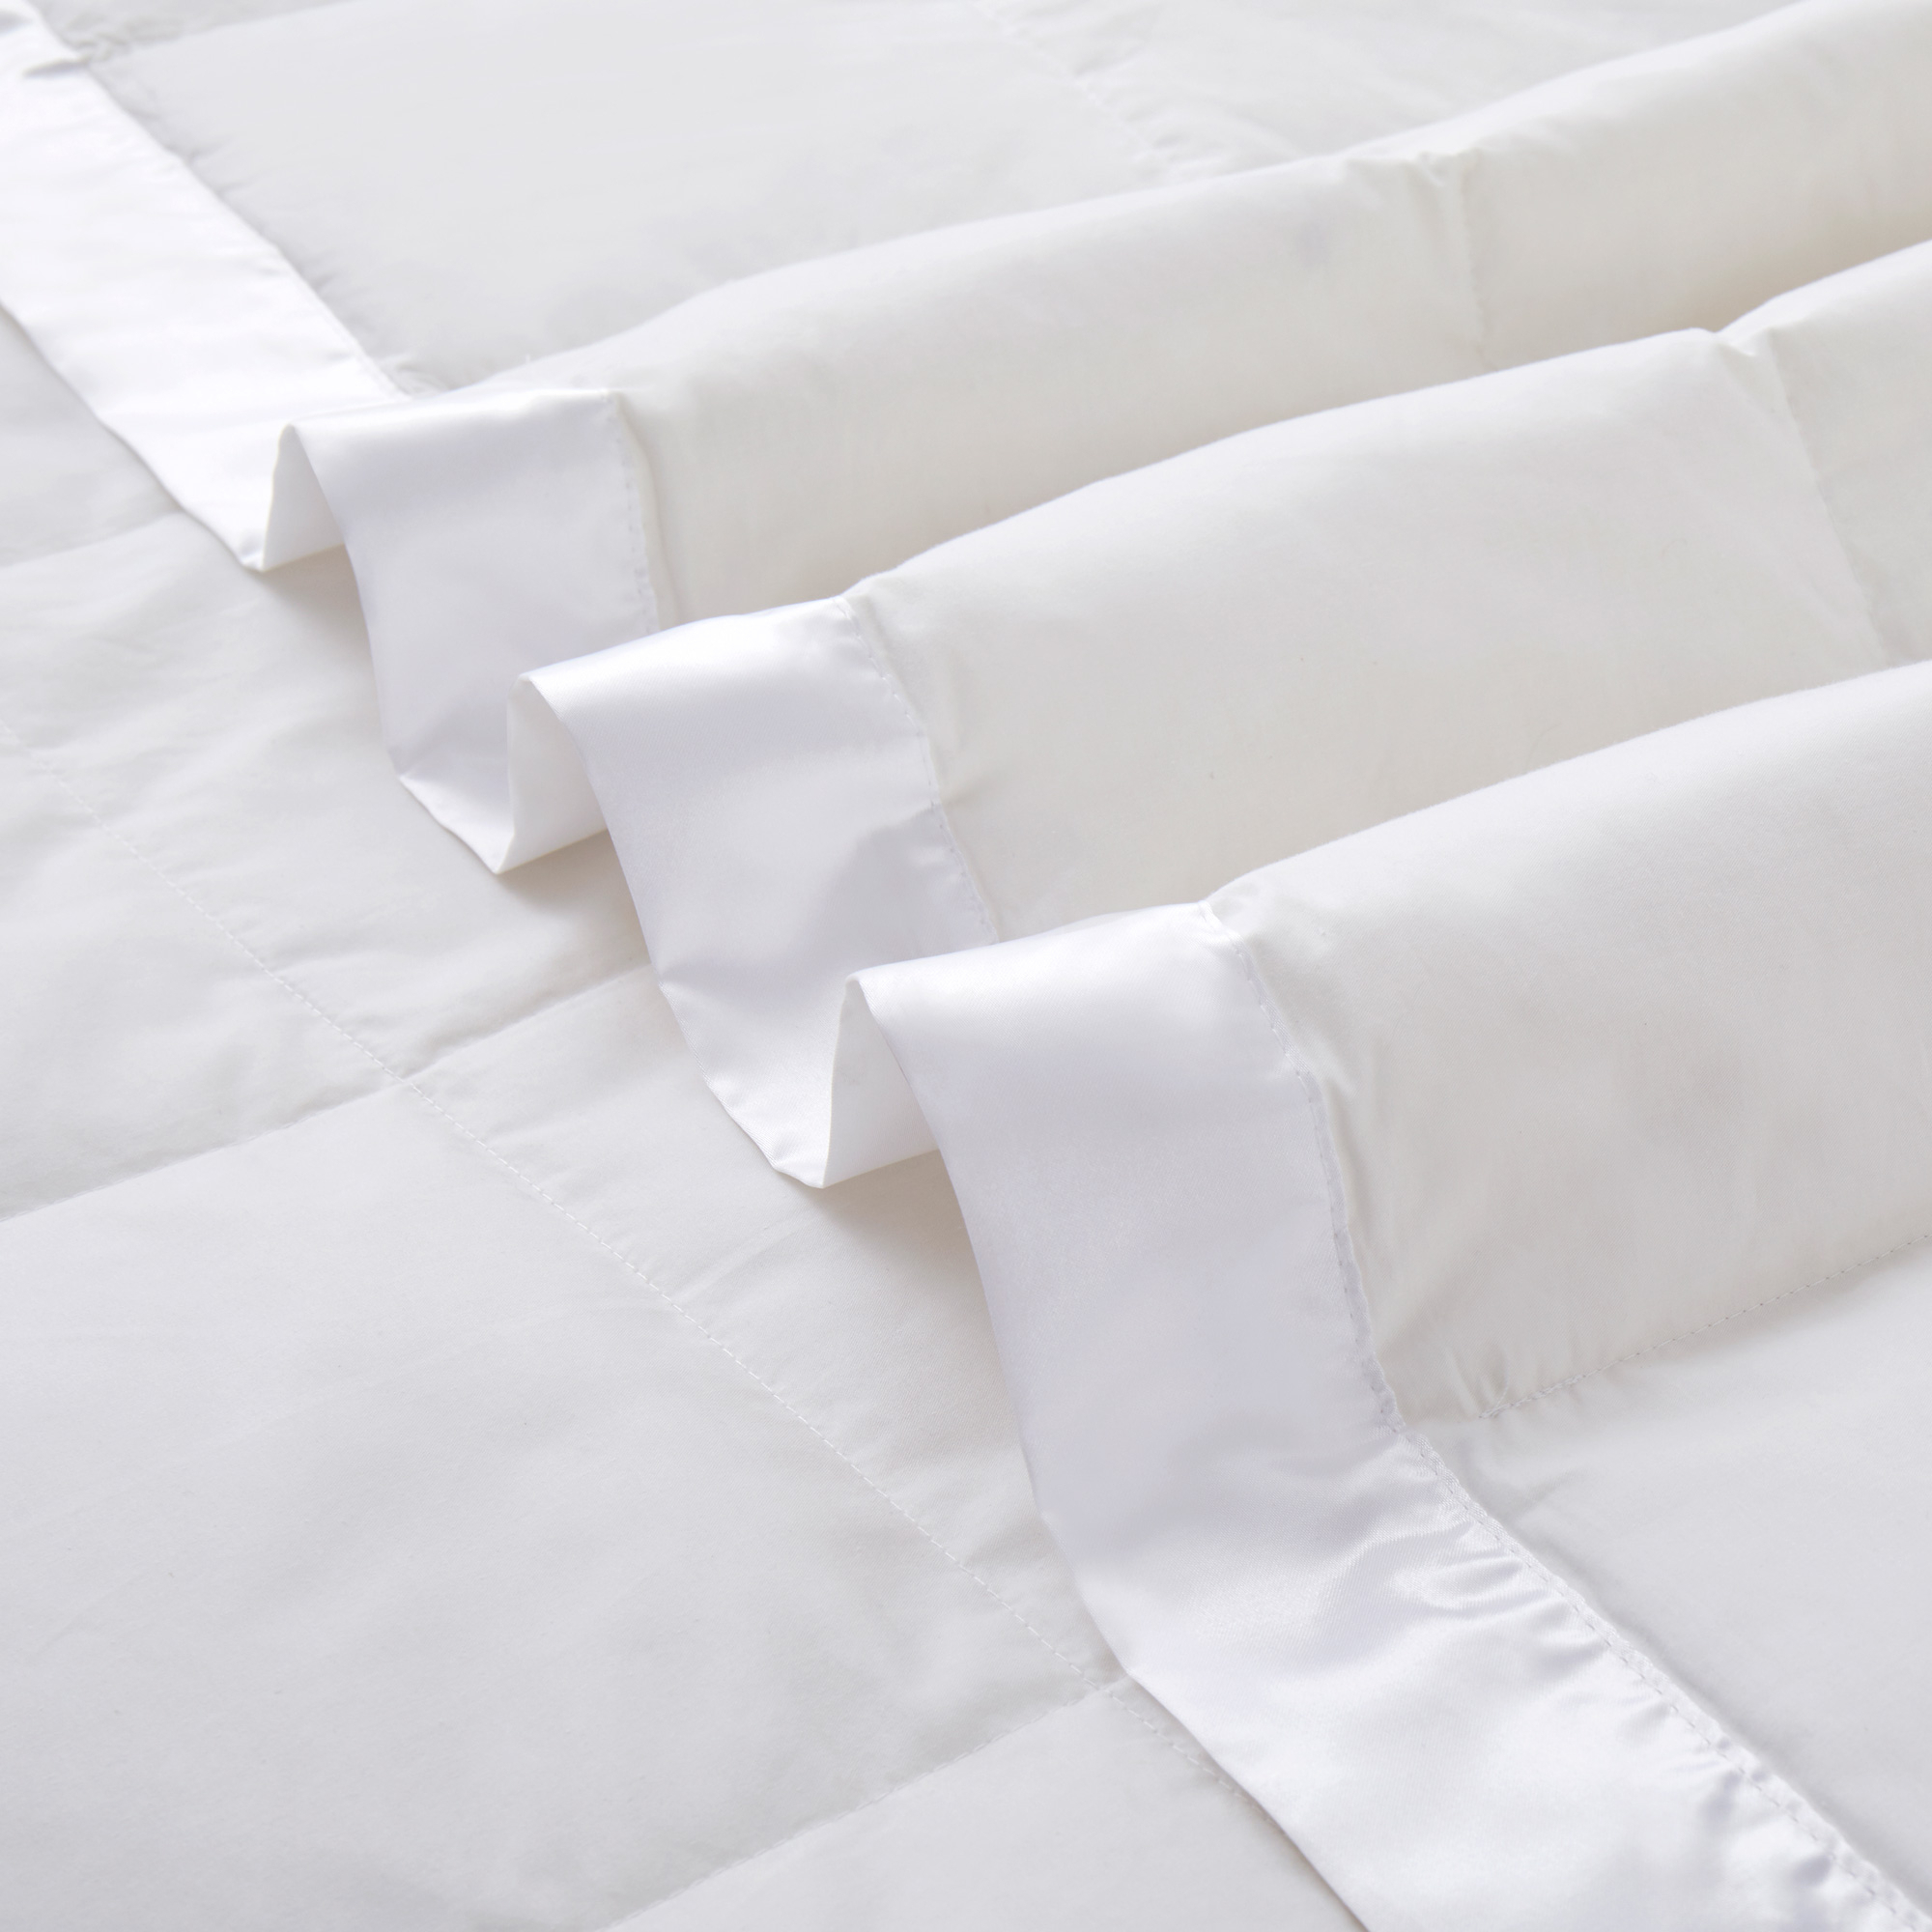 Puredown Light Weight Down Blanket, Cotton Cover, Satin Weave - White, Full/Queen